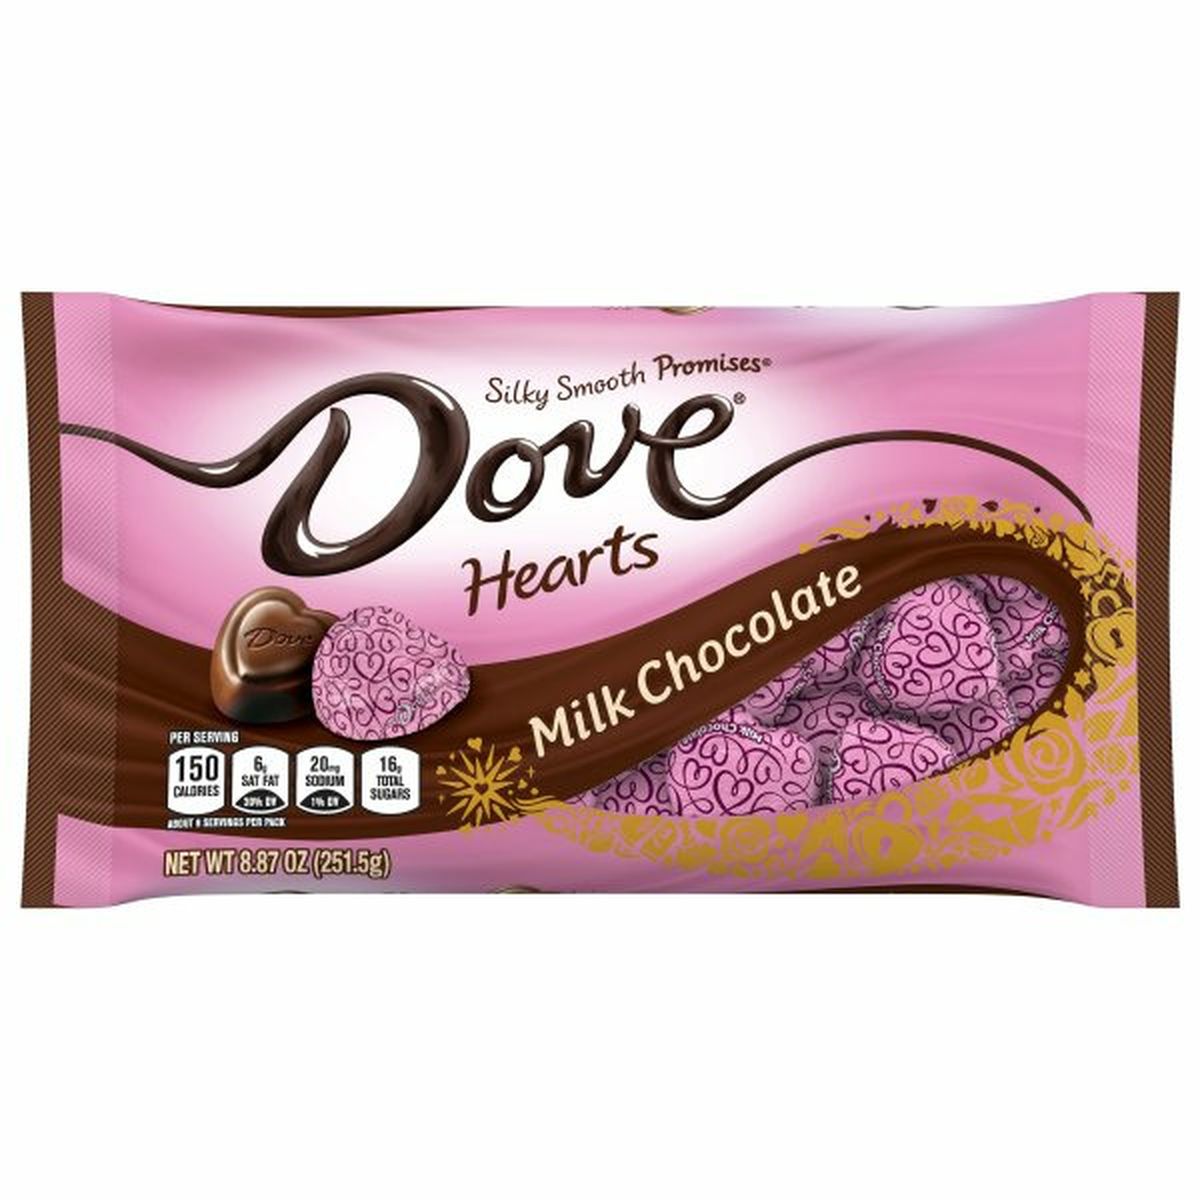 Calories in Dove Silky Smooth Promises Milk Chocolate, Hearts